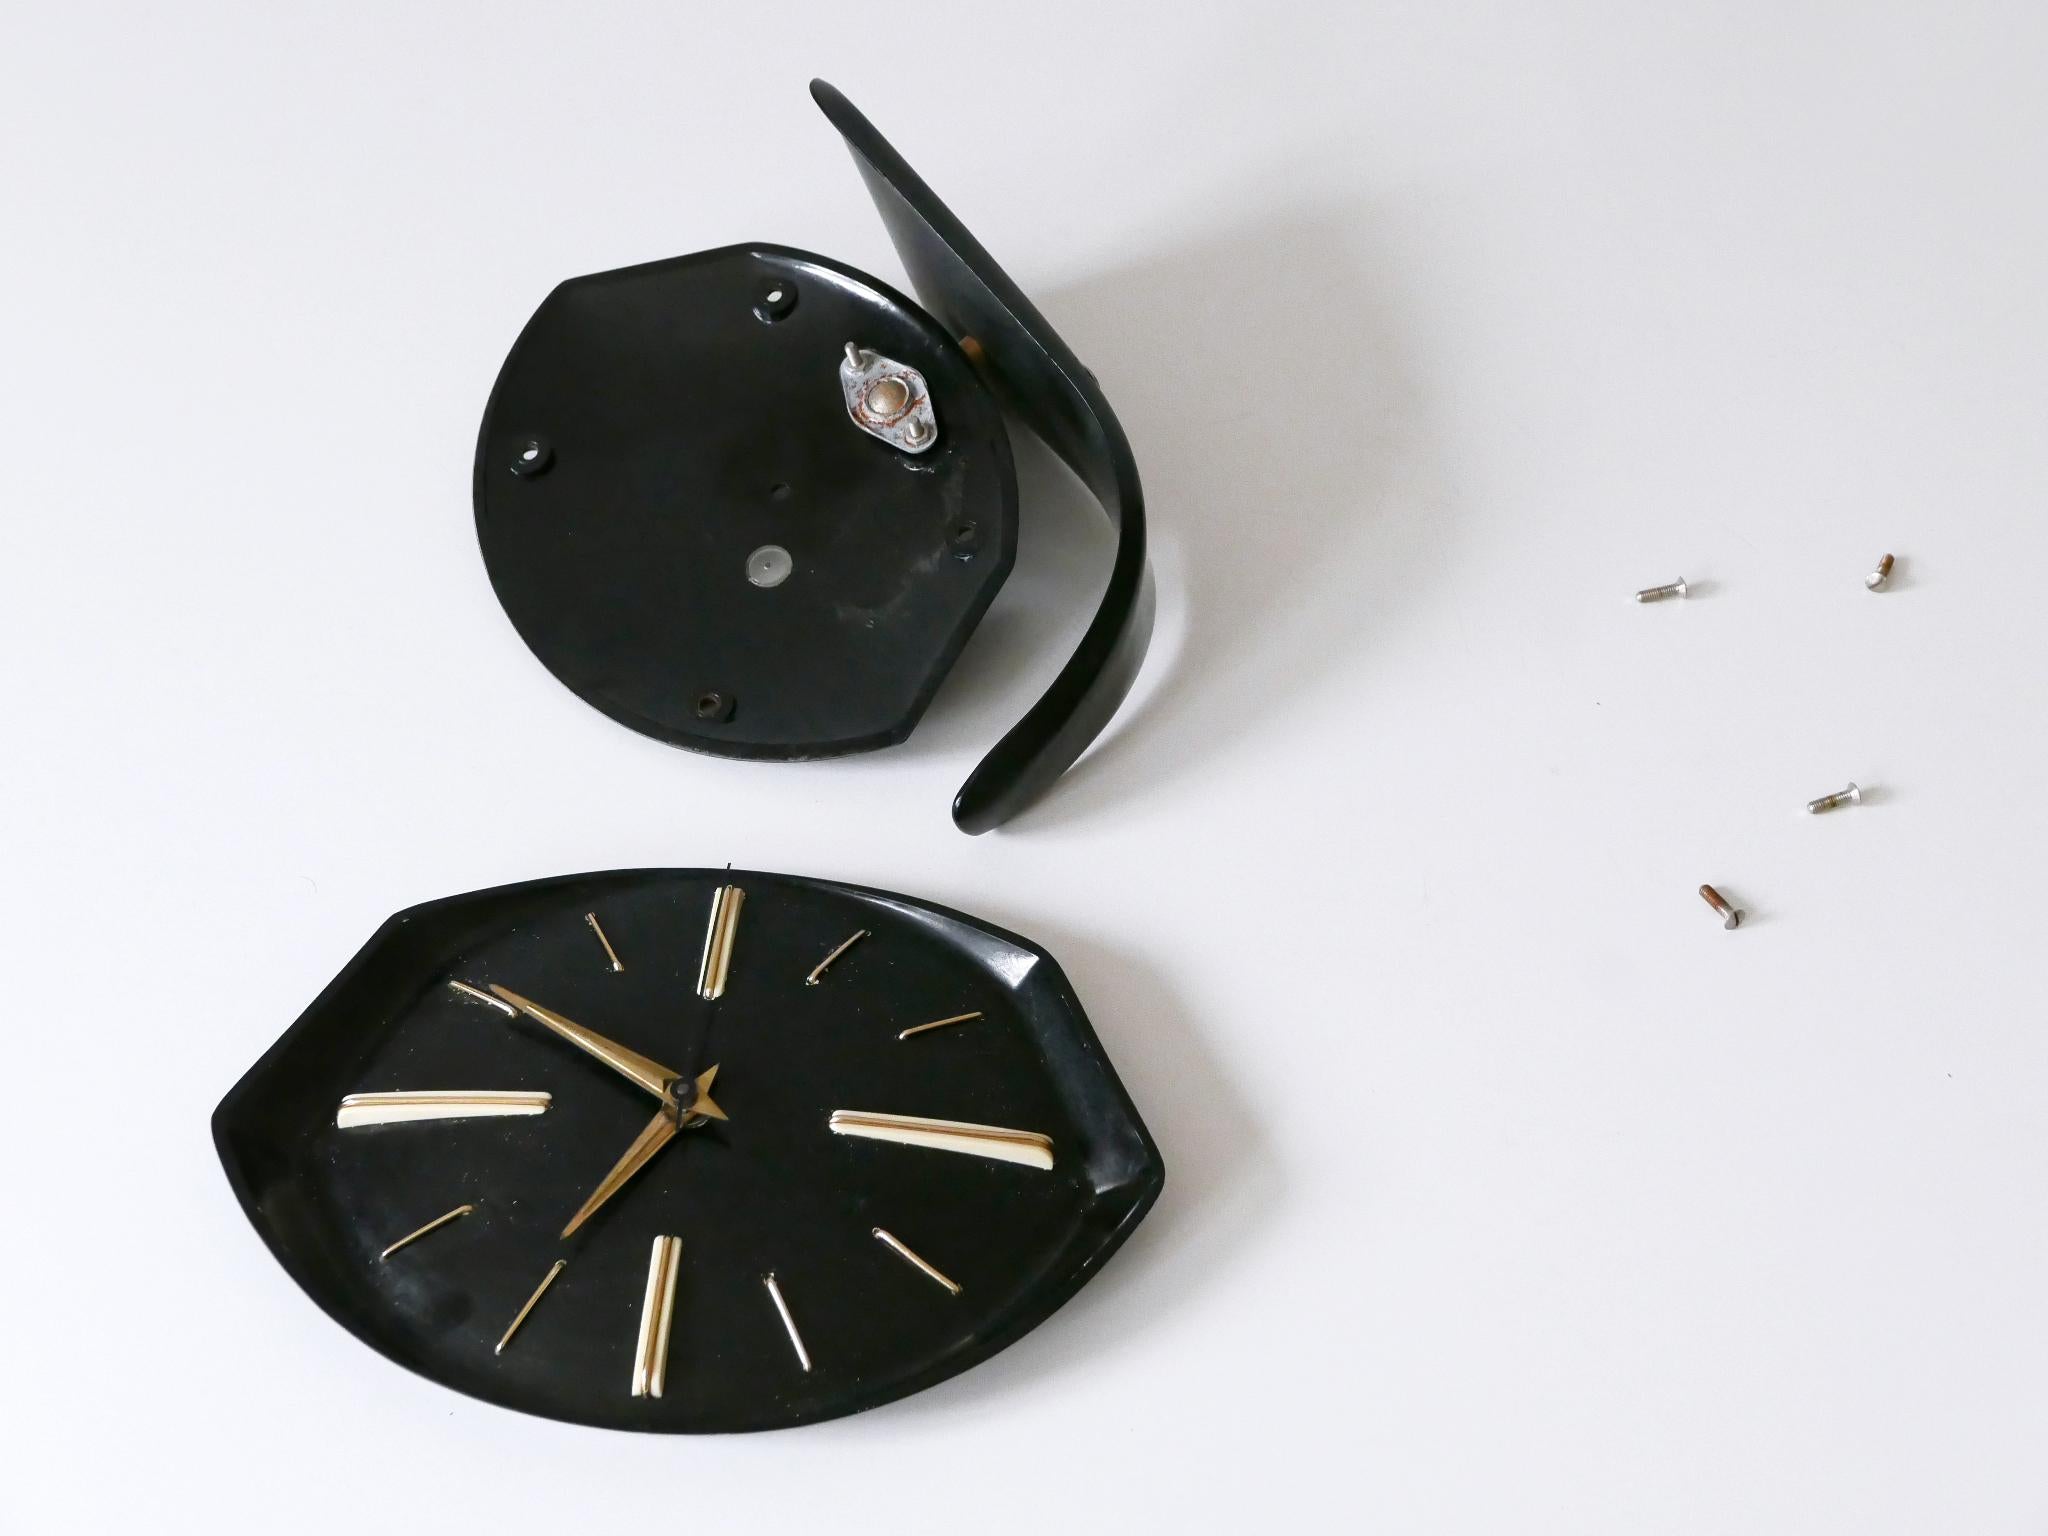 Rare and Lovely Mid-Century Modern Bakelite Table or Wall Clock by PRIM 1950s For Sale 11